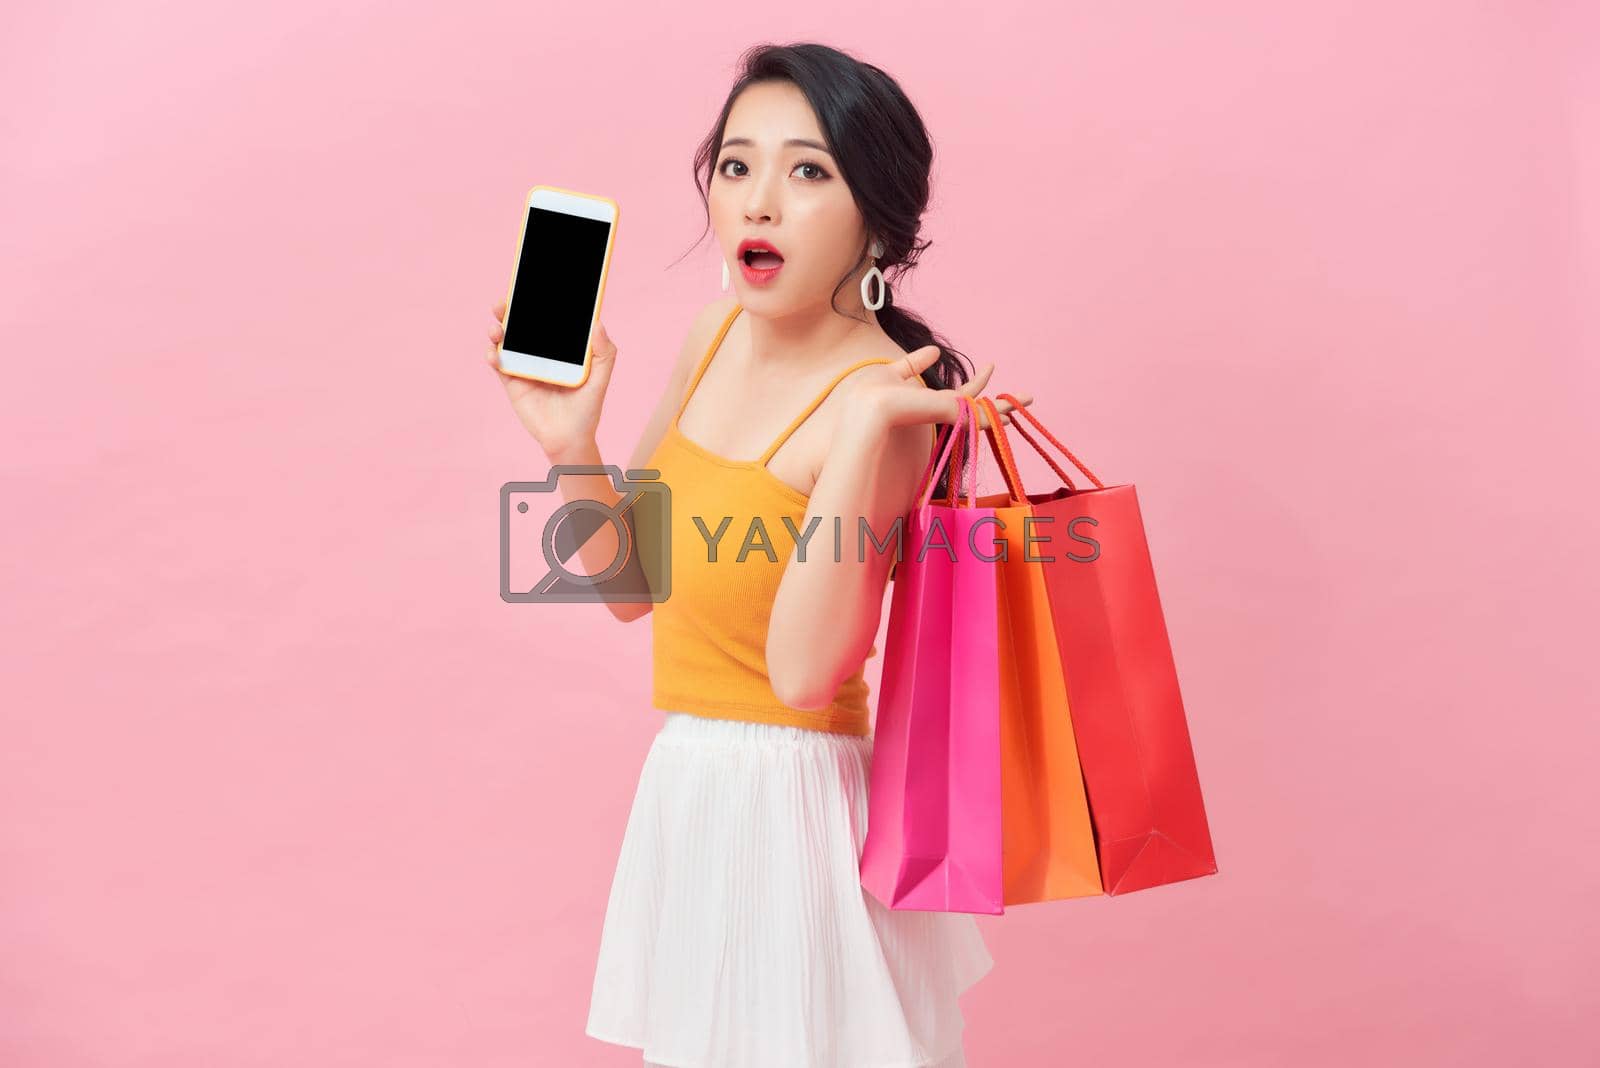 Royalty free image of Photo of shocked woman 20s in dress looking at smartphone in hand with surprise while holding shopping bags isolated over pink background by makidotvn